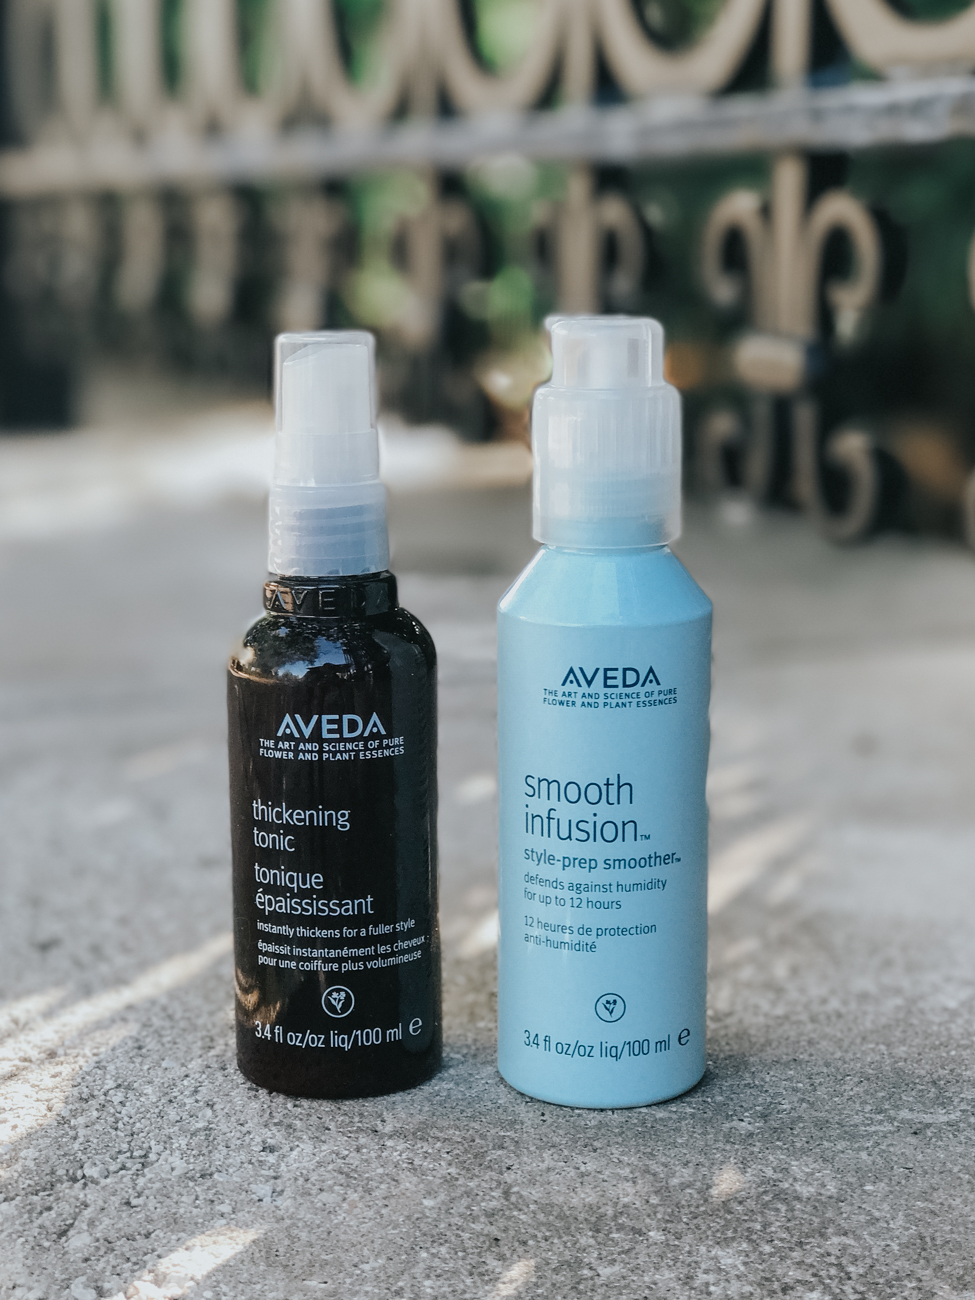 Apply Aveda's Smooth Infusion Style-prep Smoother on damp hair to defends against humidity for up to 12 hours